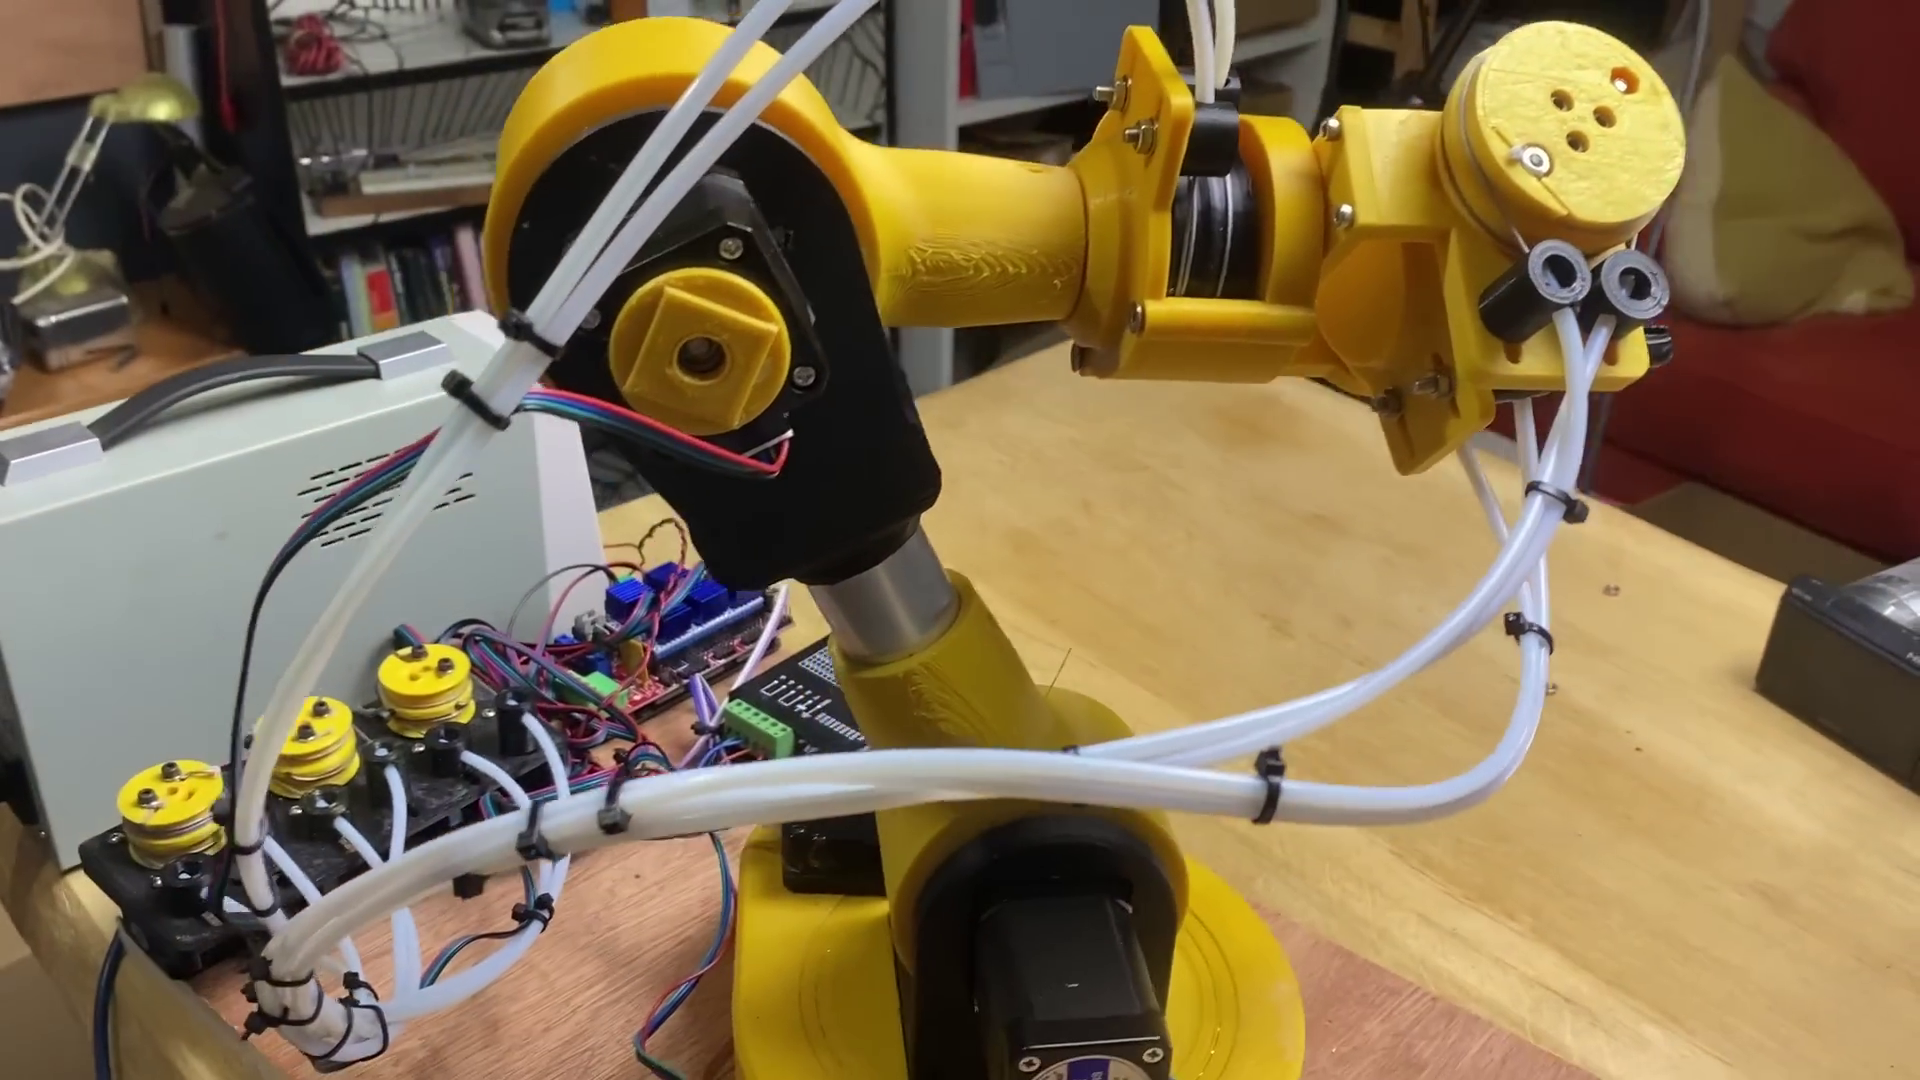 Robot Arm Wrist Without The Motor Weight | Hackaday